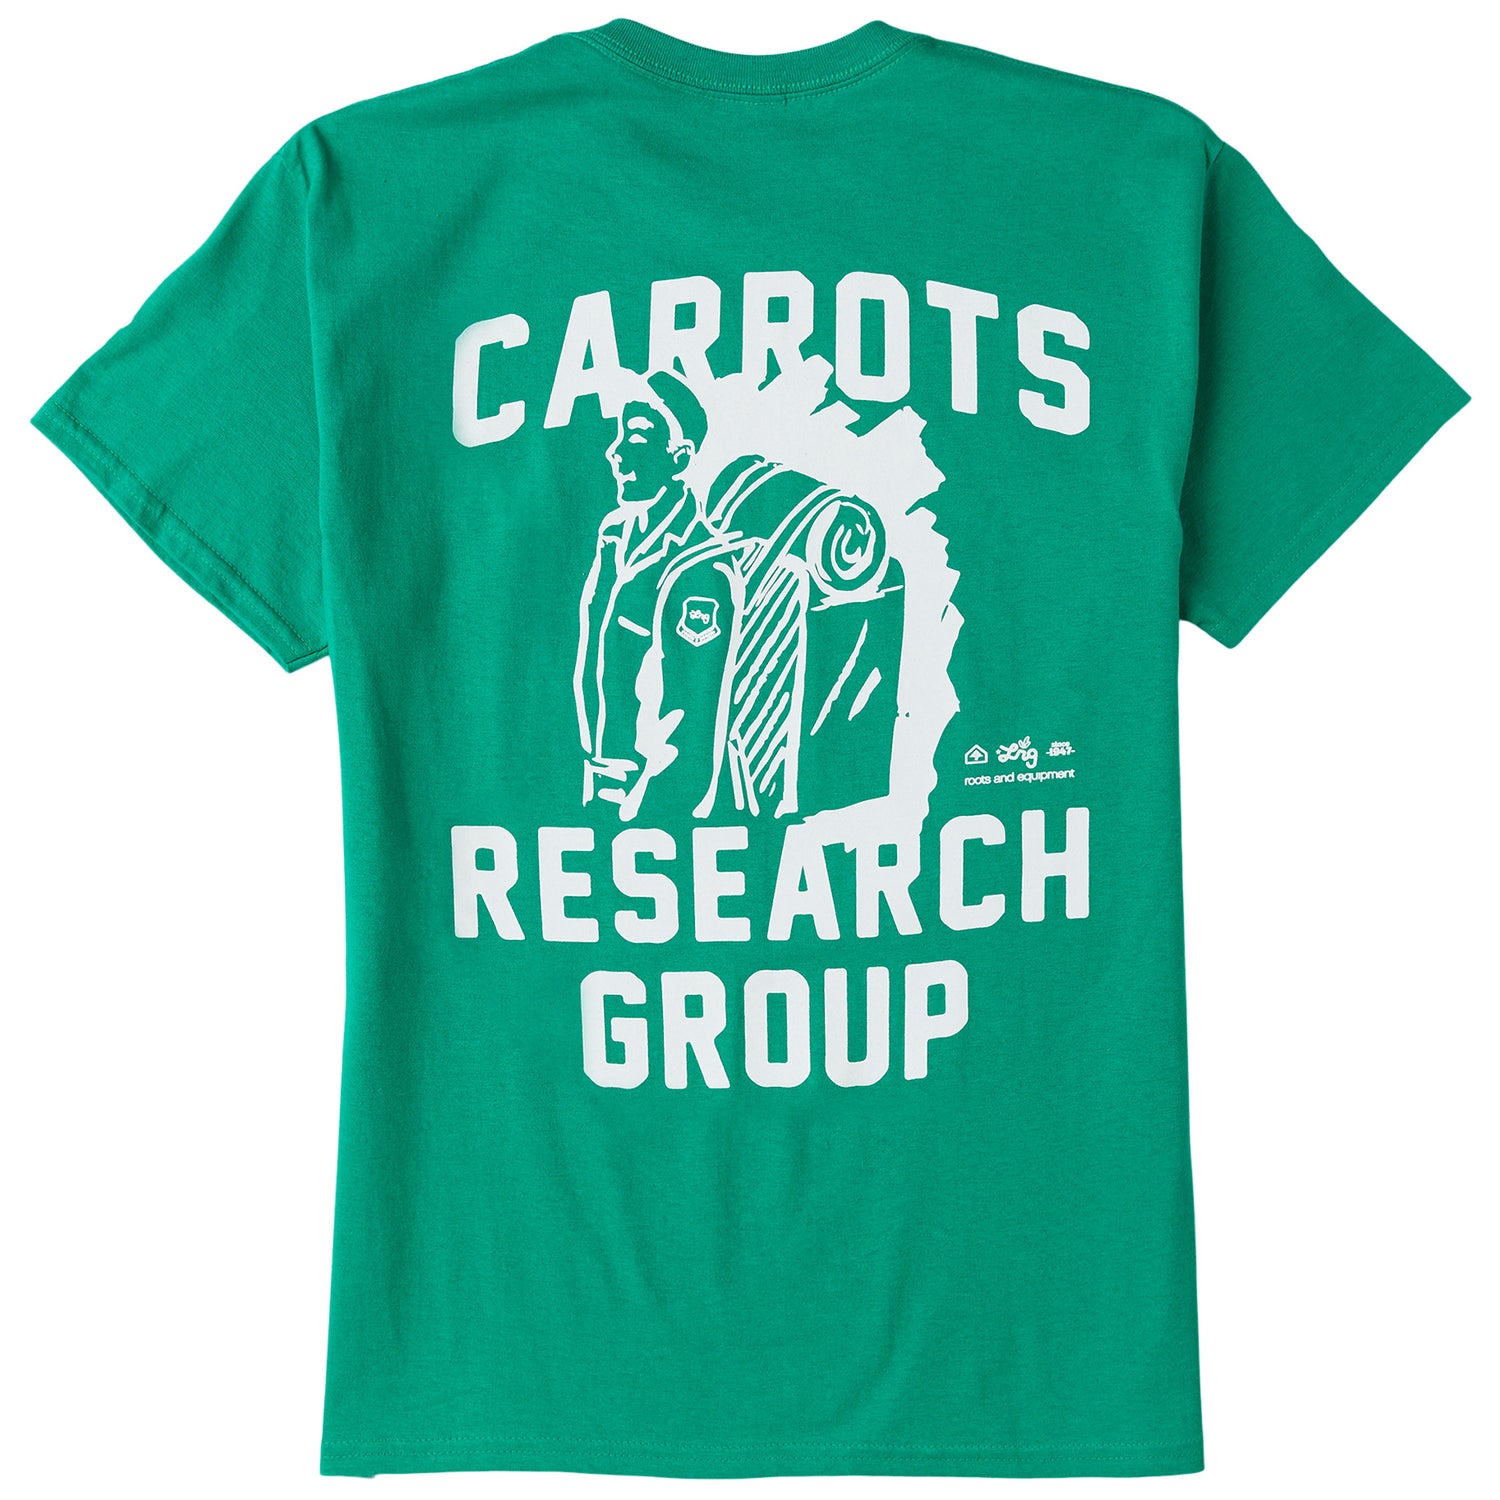 CARROTS X LRG RESEARCH GROUP TEE - KELLY GREEN